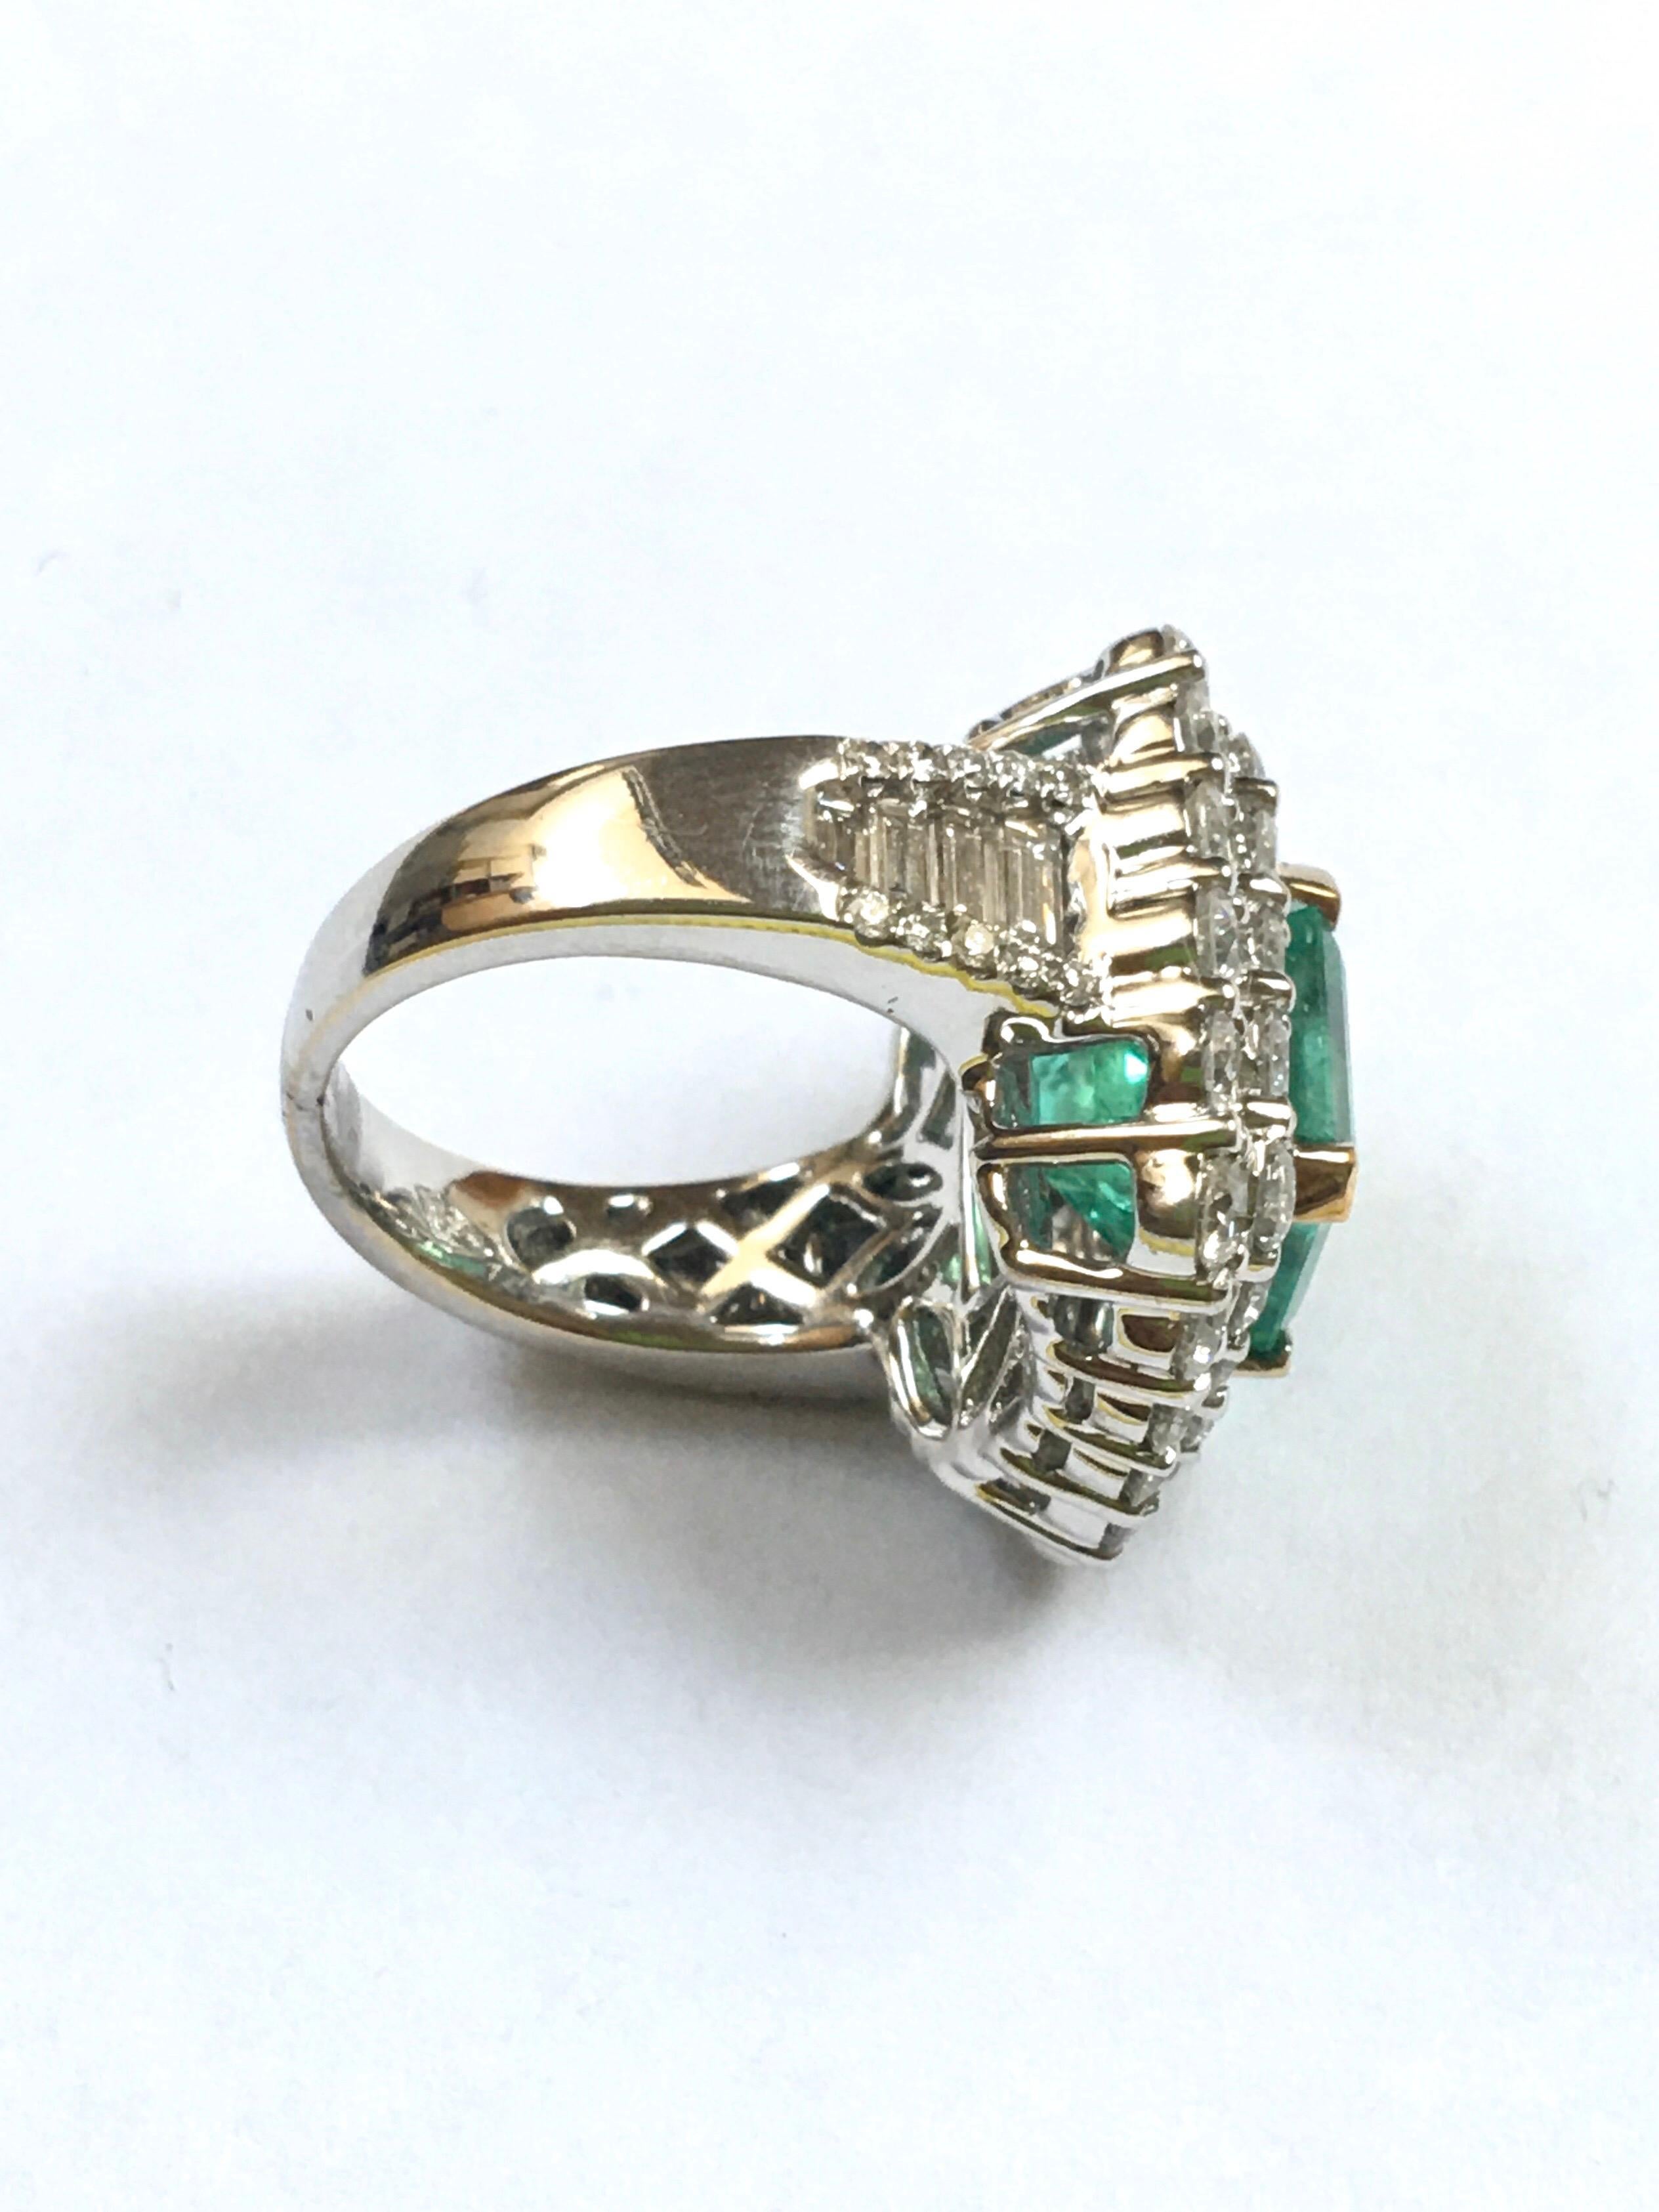 4.88 Ct Colombian Emerald 5.03 Ct Diamond Dress Ring Set in 18 Karat White Gold For Sale 1